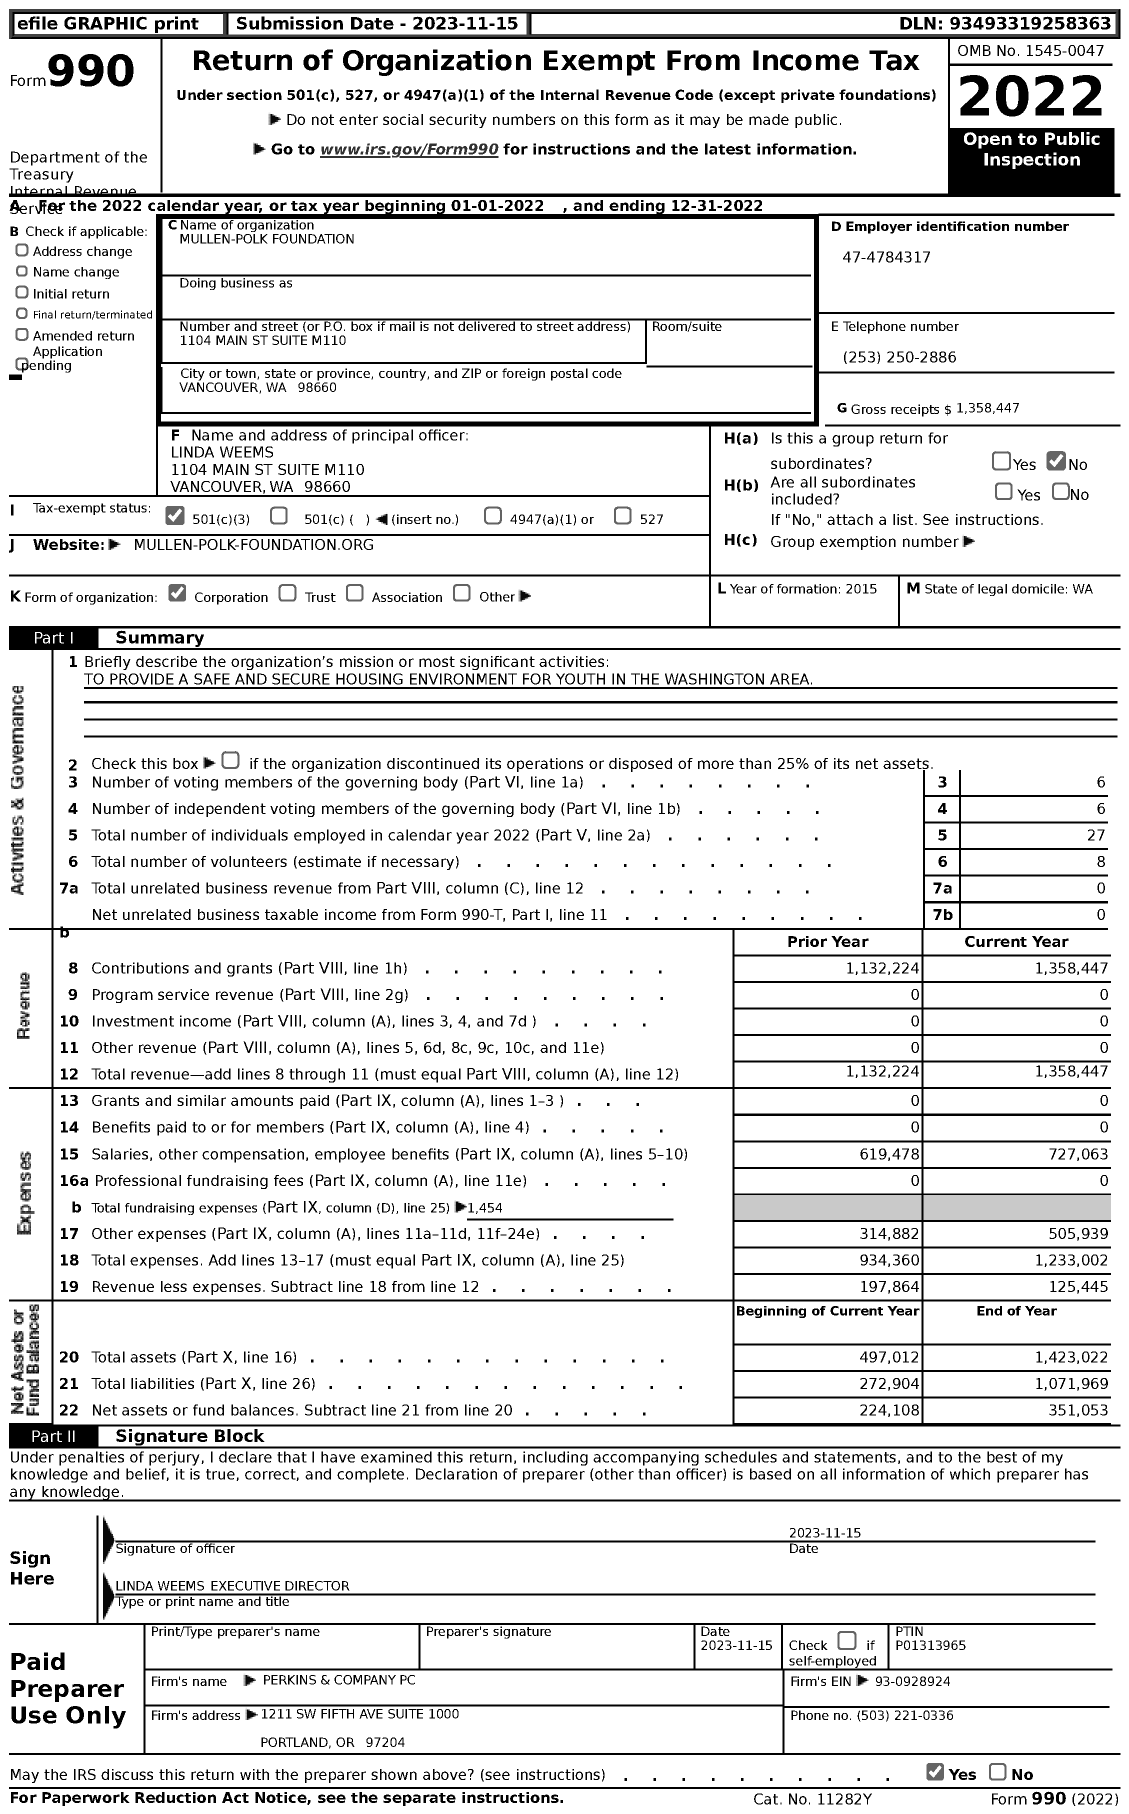 Image of first page of 2022 Form 990 for Mullenpolk Foundation